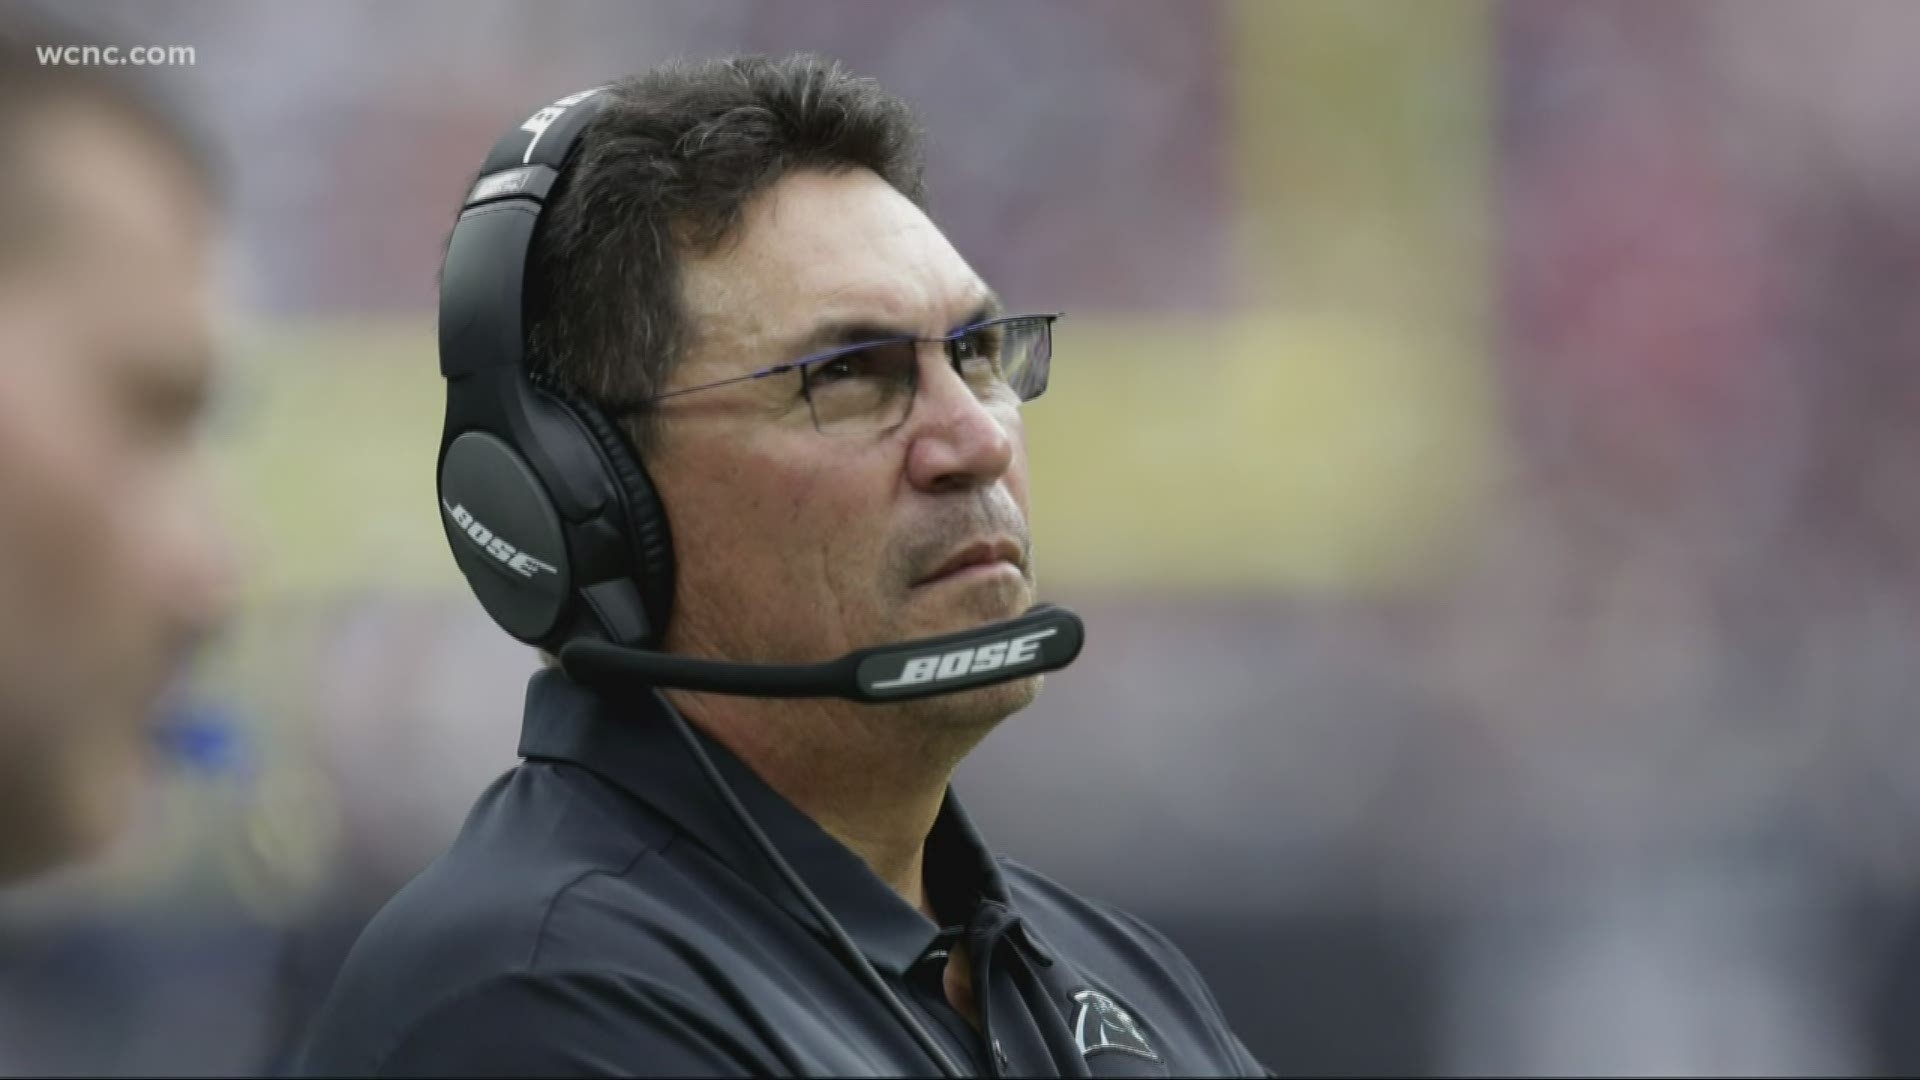 The Carolina Panthers earned three NFC South titles, an NFC Championship, and a Super Bowl appearance under head coach Ron Rivera.